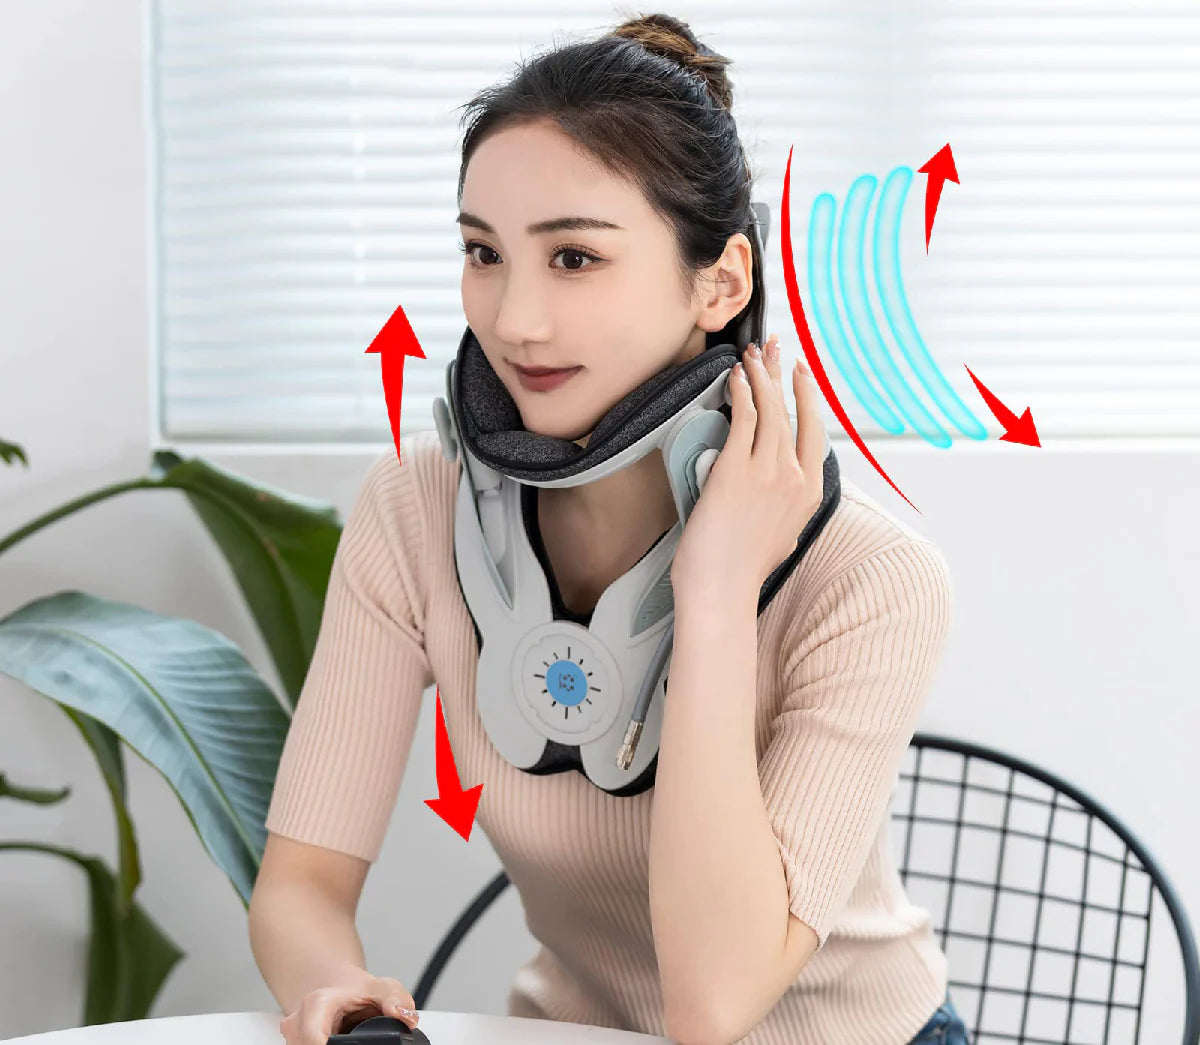 Active adult female adjusting SpineAlign posture corrector for neck pain relief and spinal alignment during a break